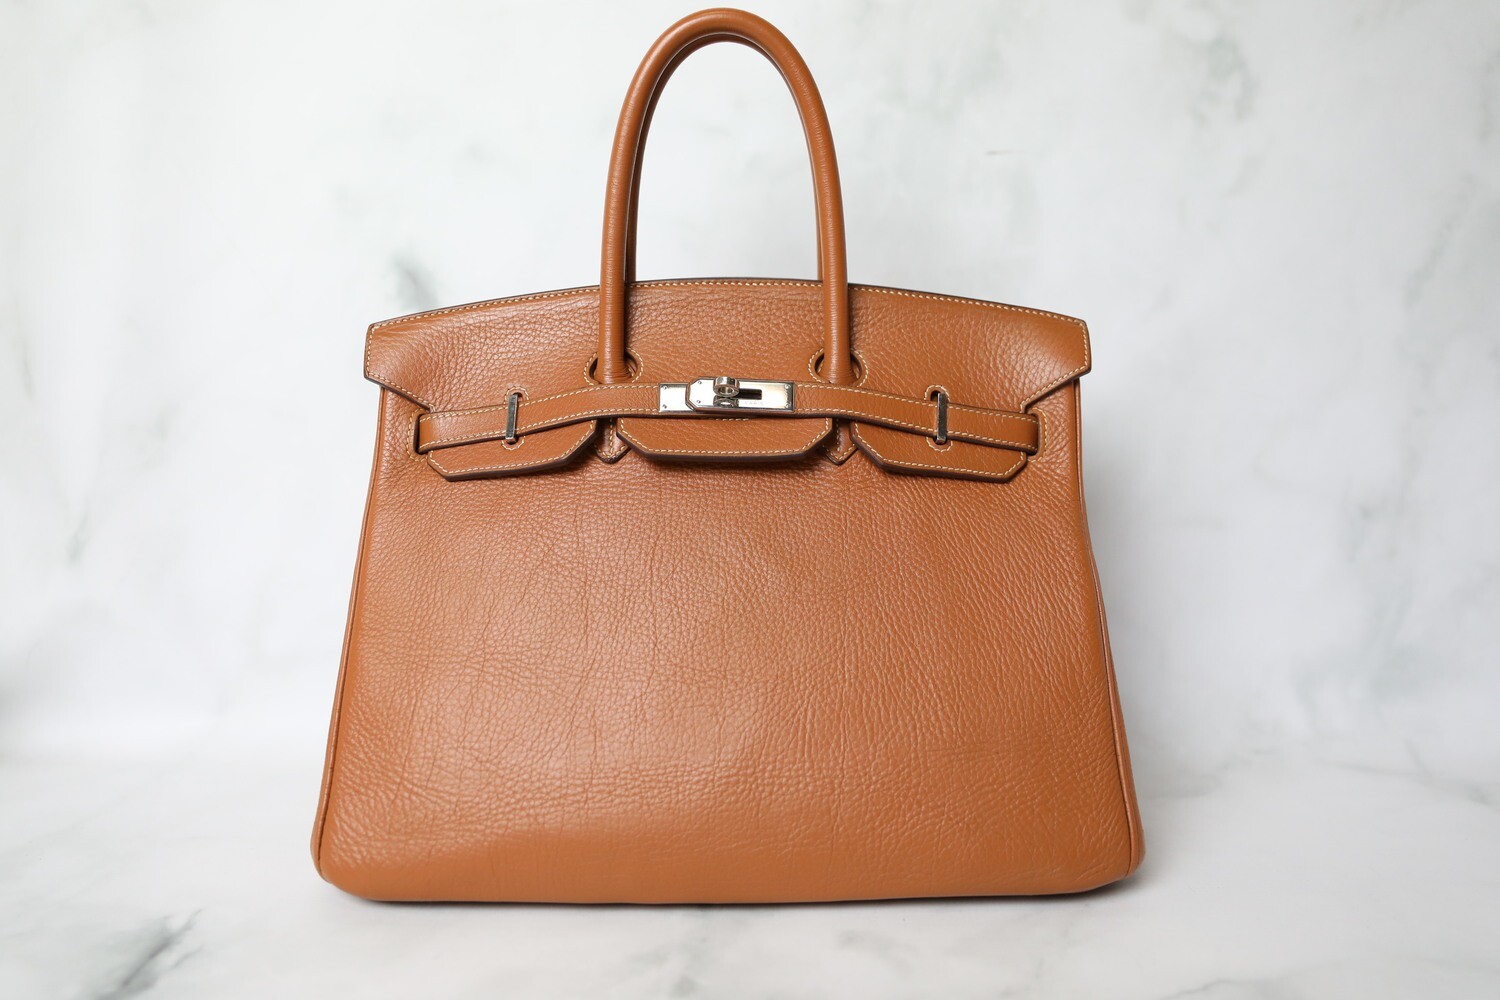 Hermes Birkin 35, Gold Clemence with Palladium Hardware, Preowned in Dustbag WA001